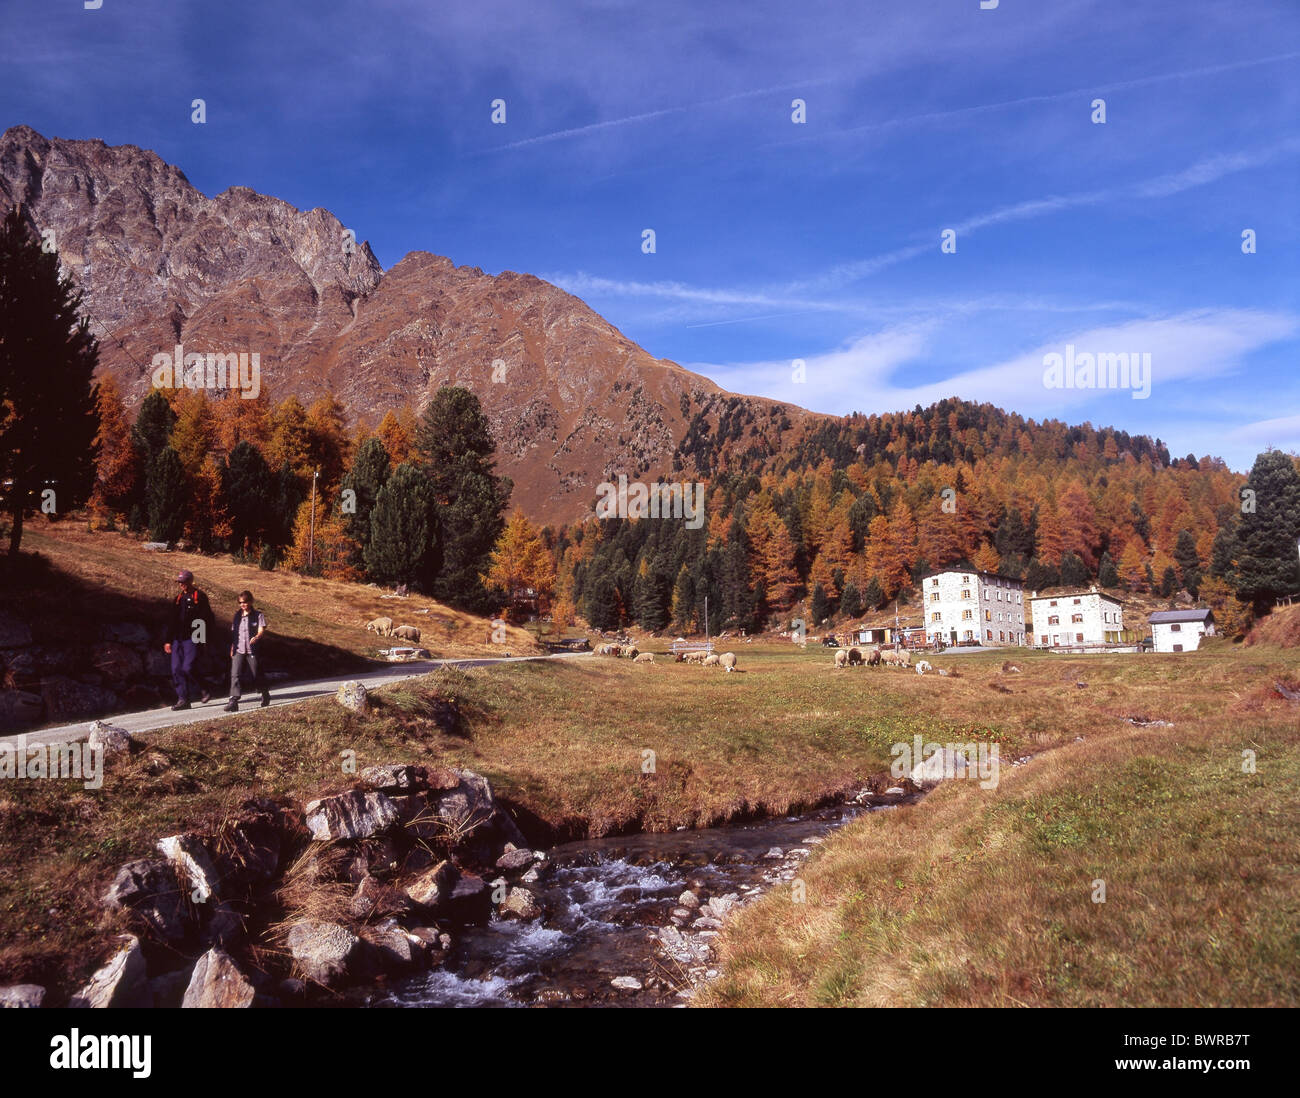 Suisse Europe Saoseo Alp Hauser Val di Campo Val da Camp Val Poschiavo canton Grisons Grisons Grisons Banque D'Images